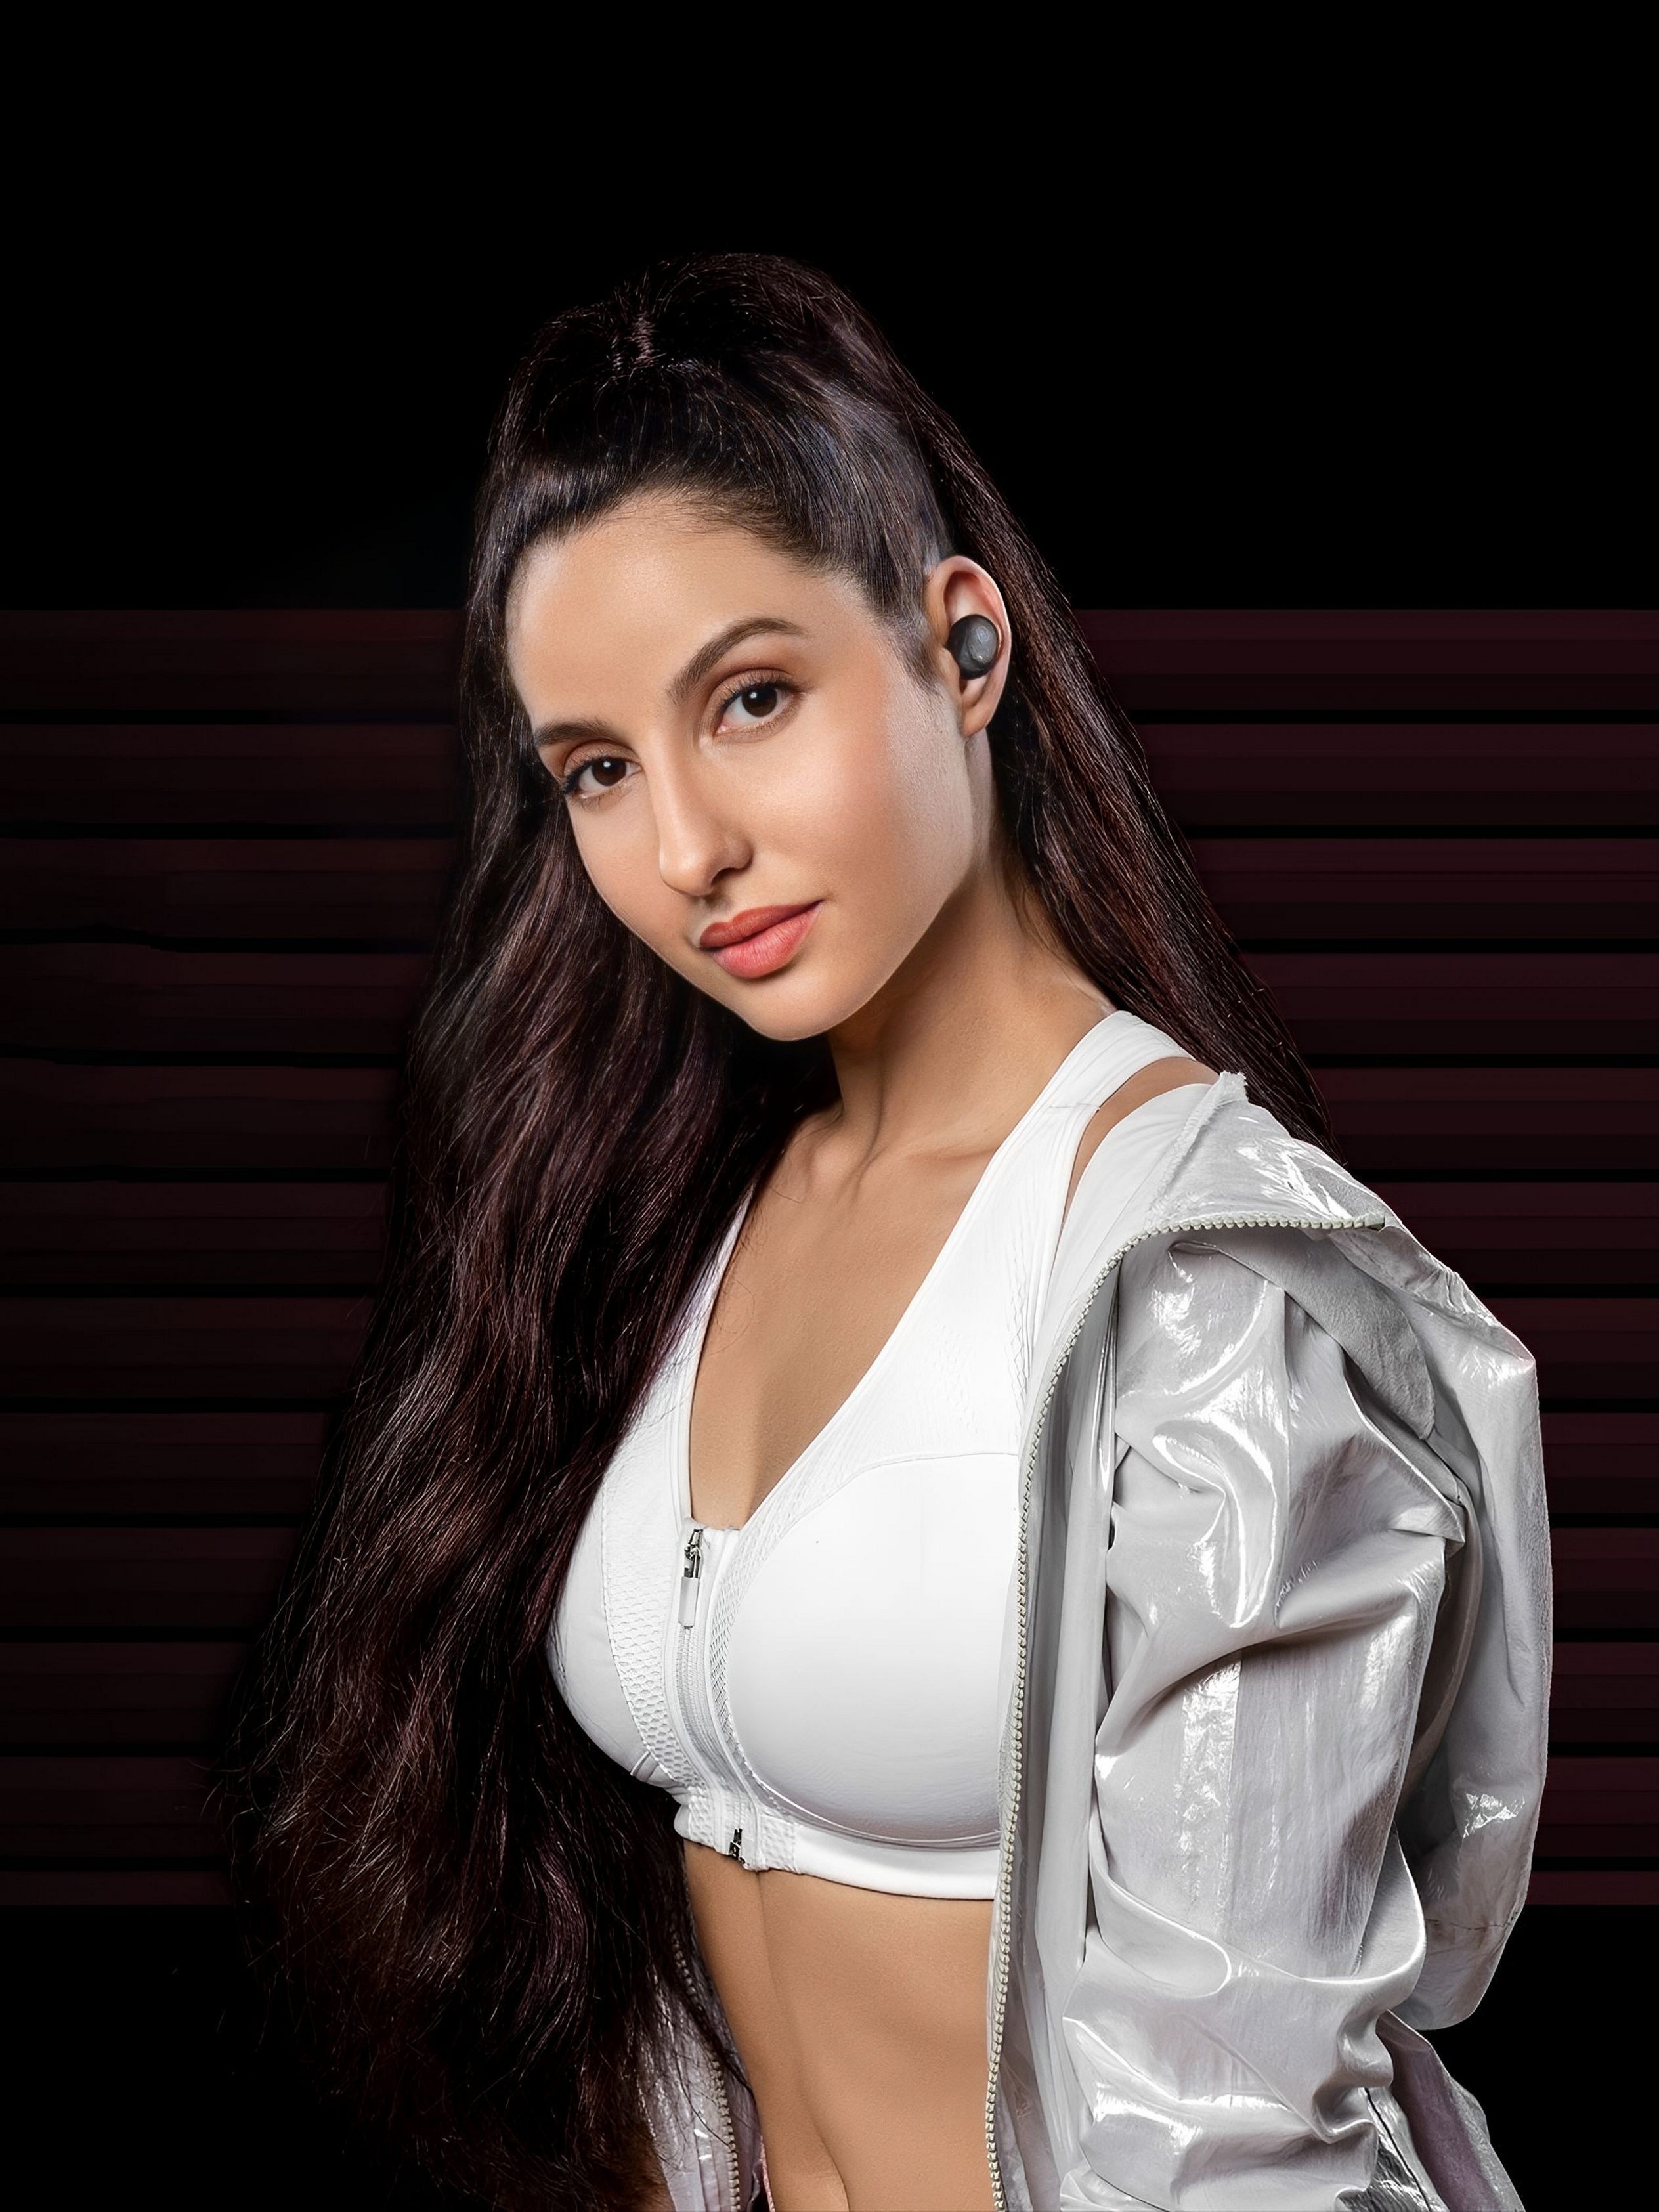 2527px x 3369px - Nora Fatehi [2527 x 3369]- High Quality Picture - Ultra HQ | Bollywood Pics